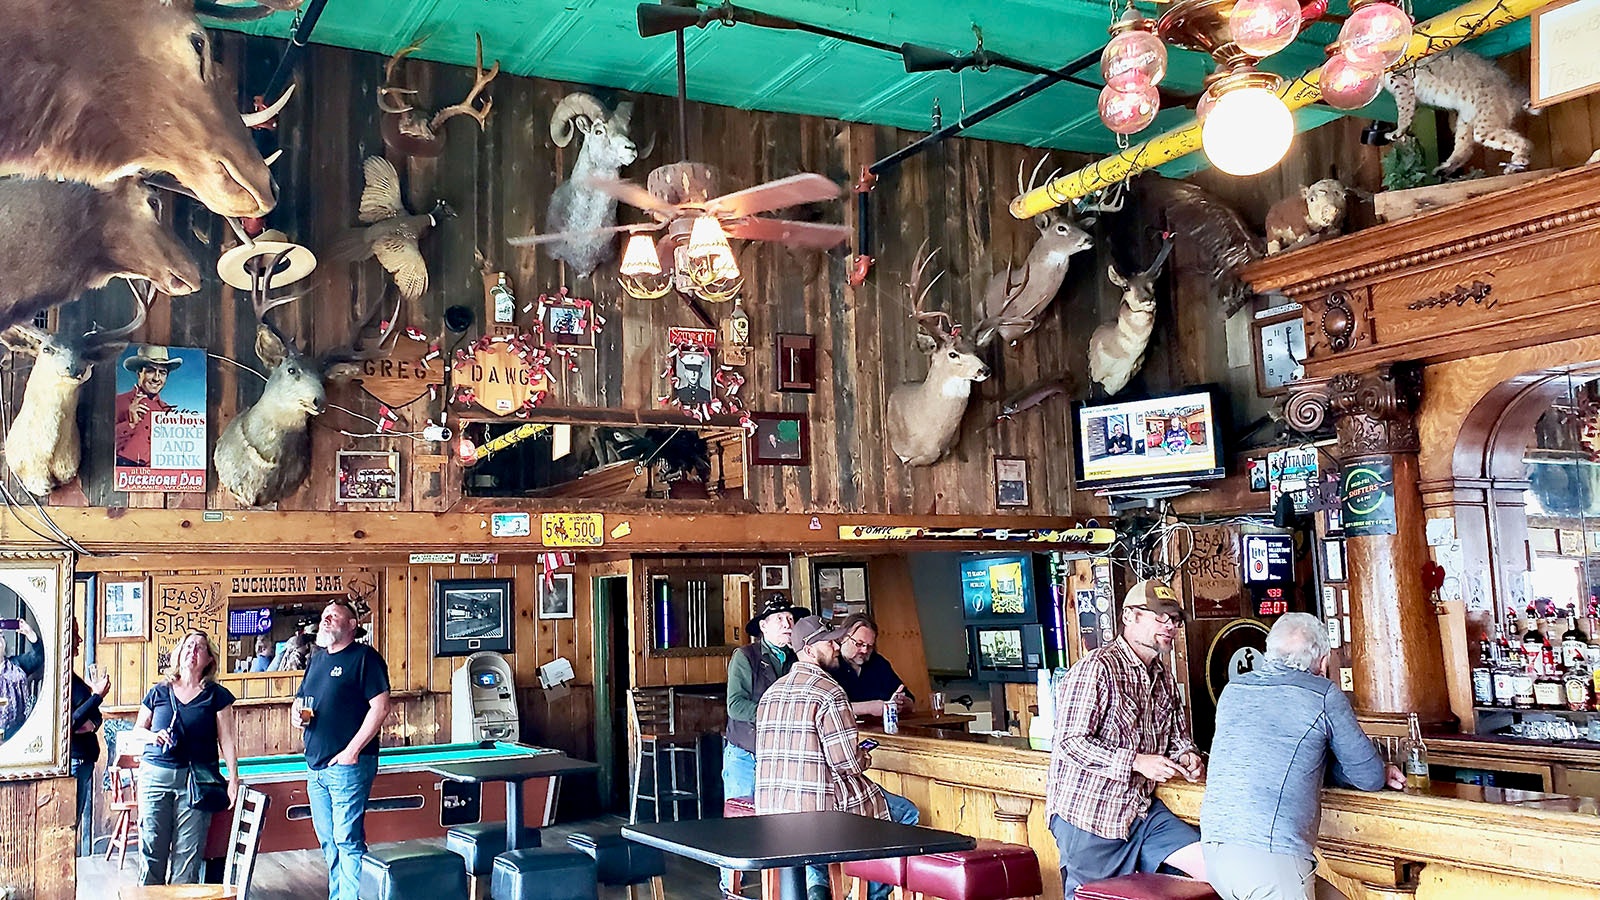 Mary Hopkins and Jerry Peterson, back left, look at murals in the Buckhorn while patrons drink at the bar.